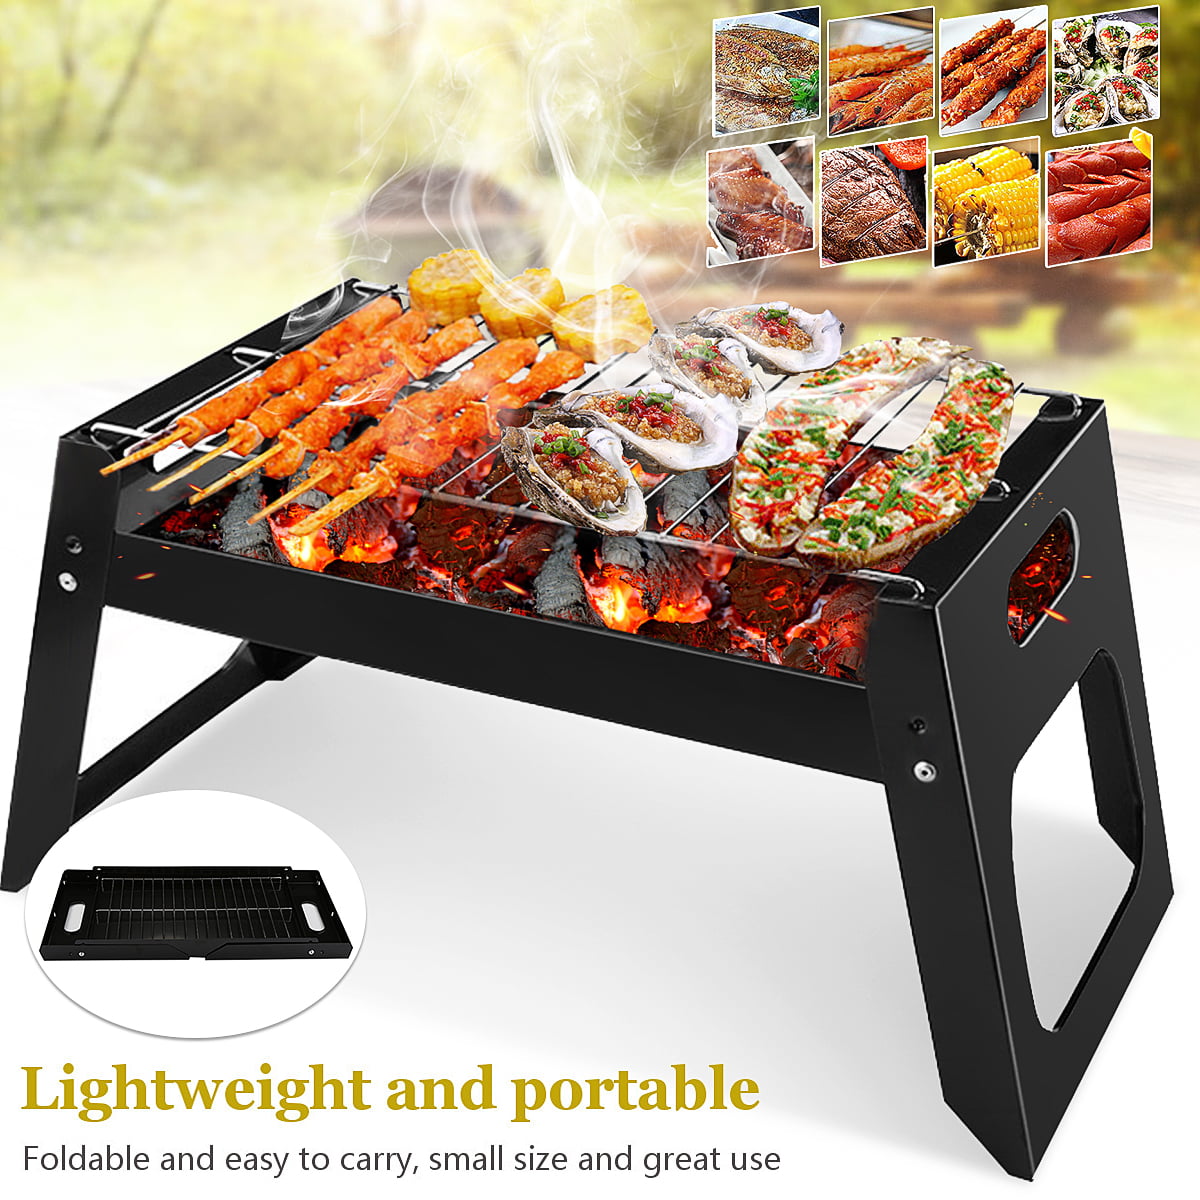 Barbecue Charcoal Grill Folding Portable Lightweight Outdoor Camping BBQ Tools 